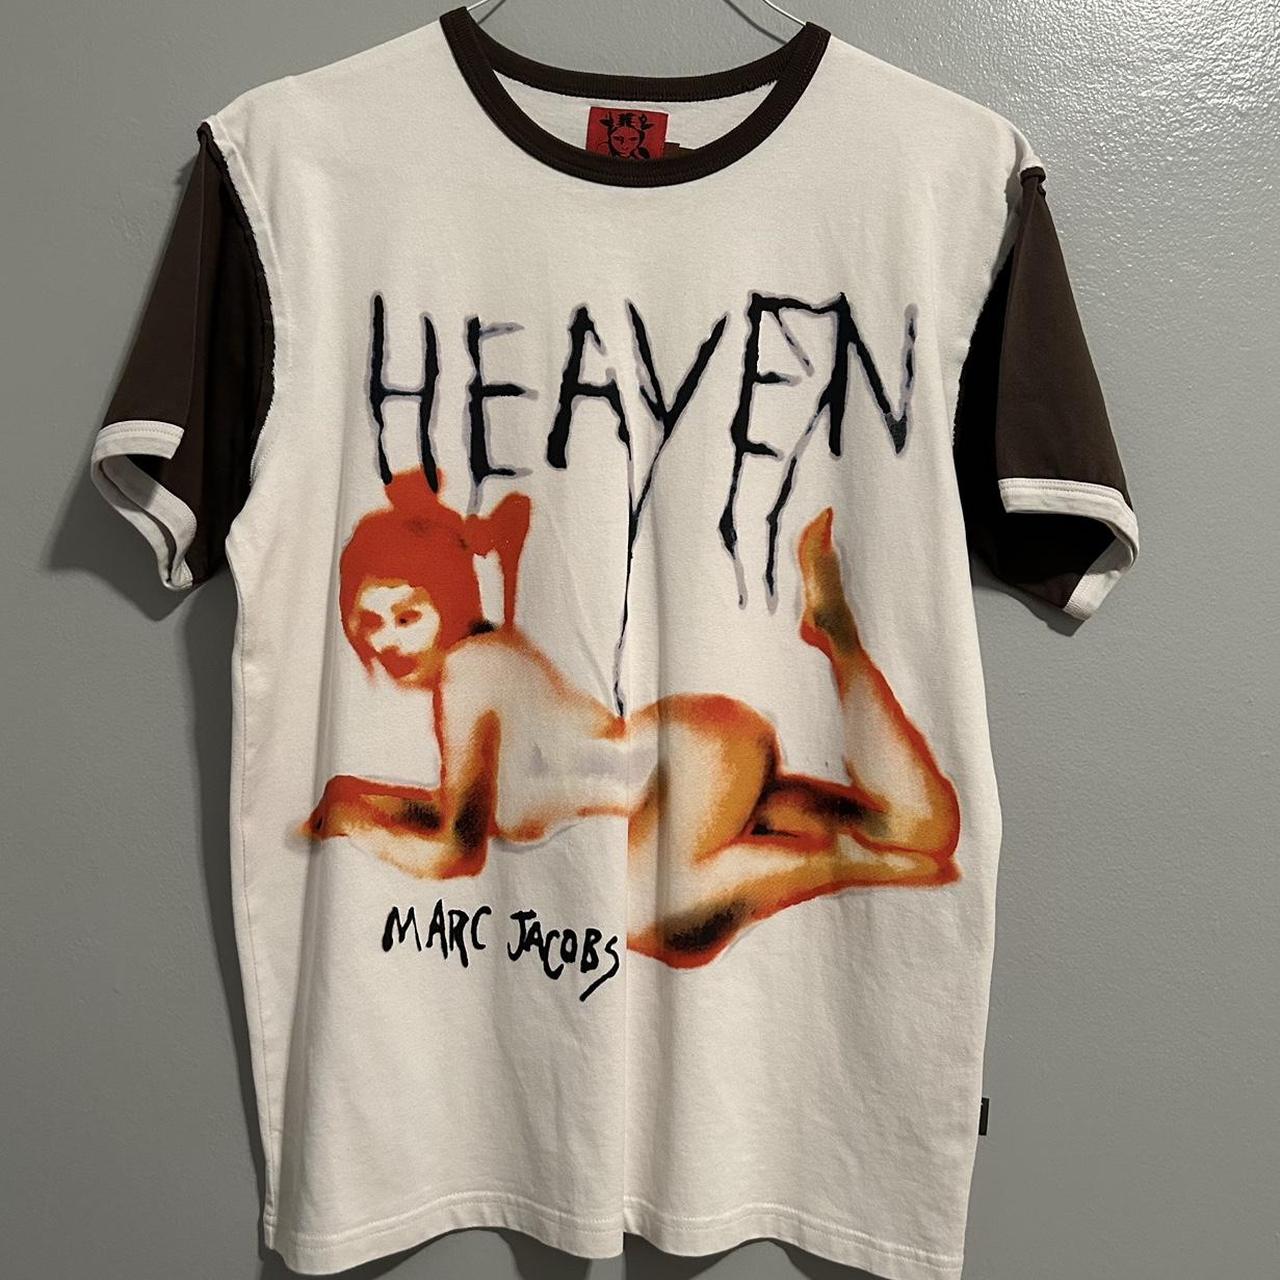 Heaven by Marc Jacobs 'Pin Up T-Shirt' Size: Small... - Depop